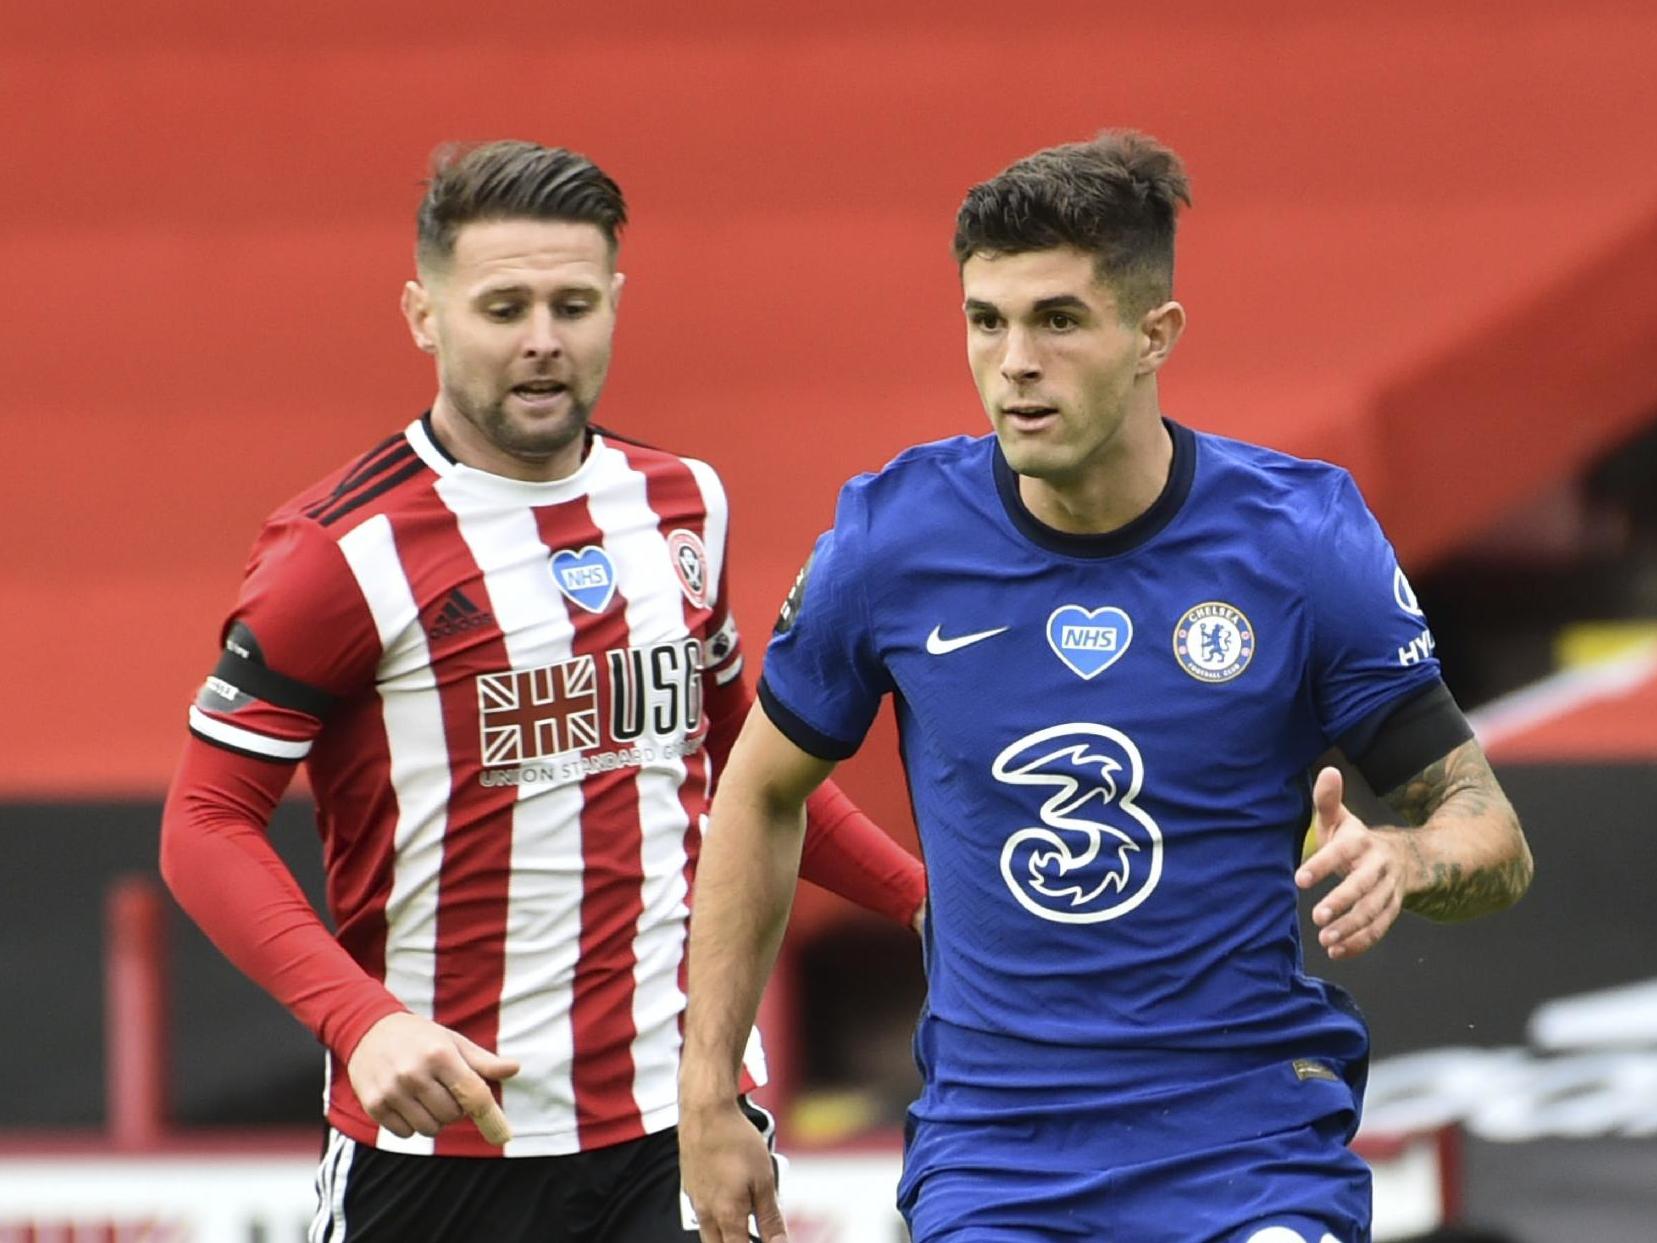 Sheffield United vs Chelsea LIVE: Latest score, goals and updates from Premier League fixture tonight